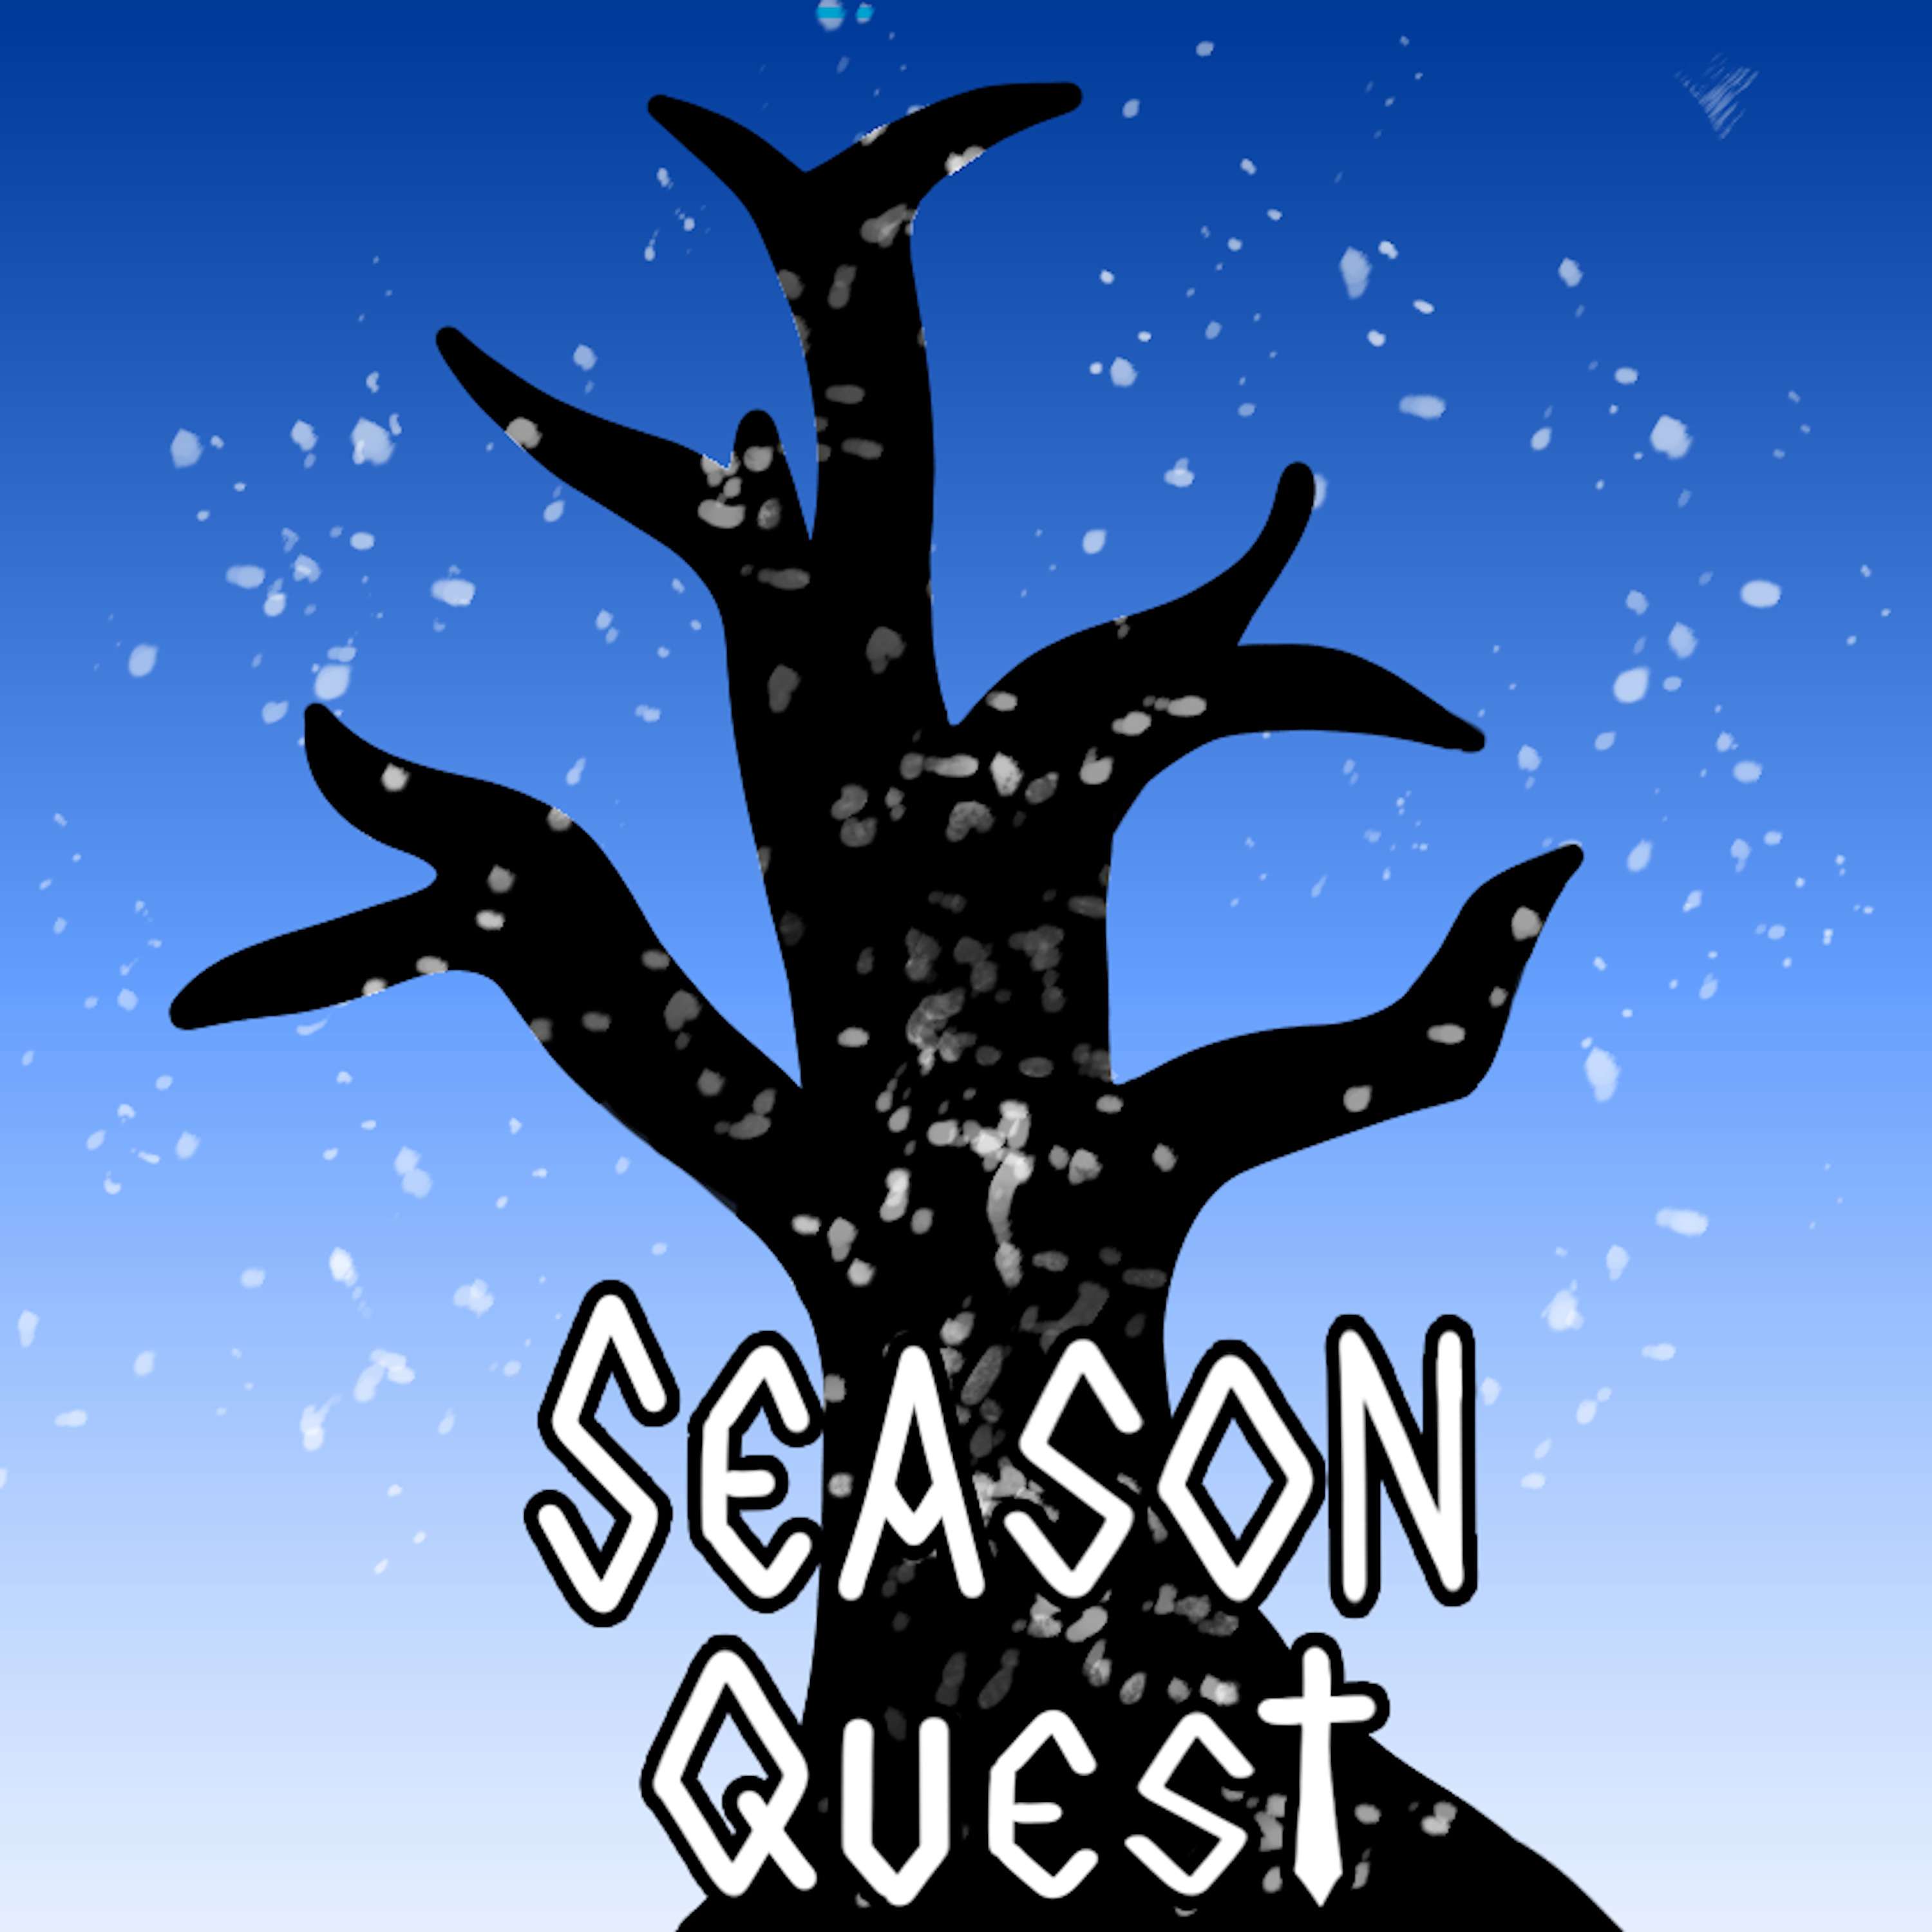 WINTER (Ep. 04): I Can't Dinosaur County